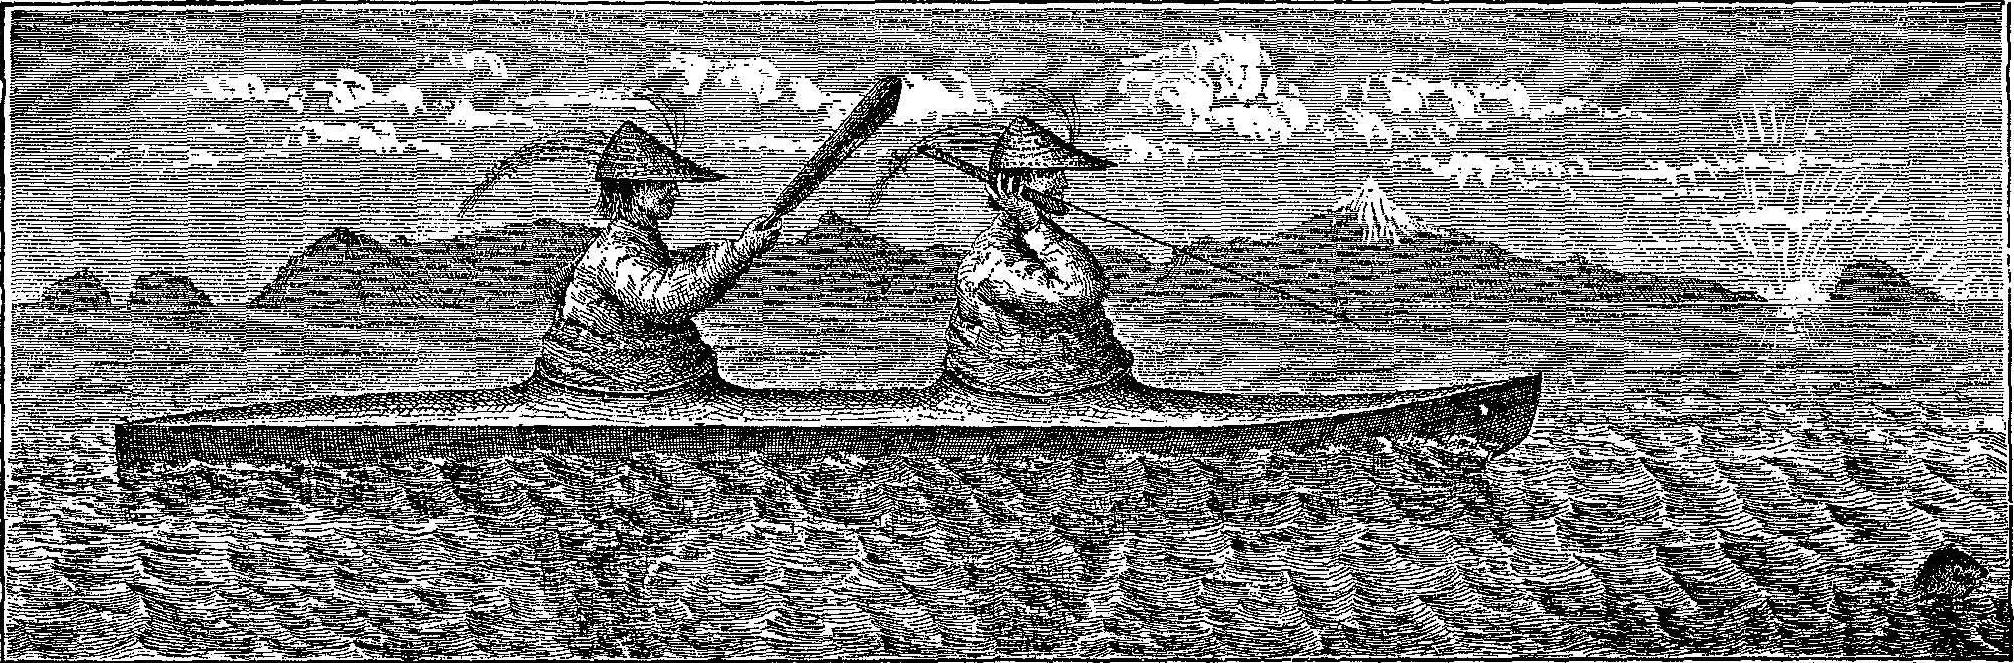 Scammon - Aleutian Islanders' Sea Otter Canoe, or Baidarka, With Hunters Engaged in the Chase.